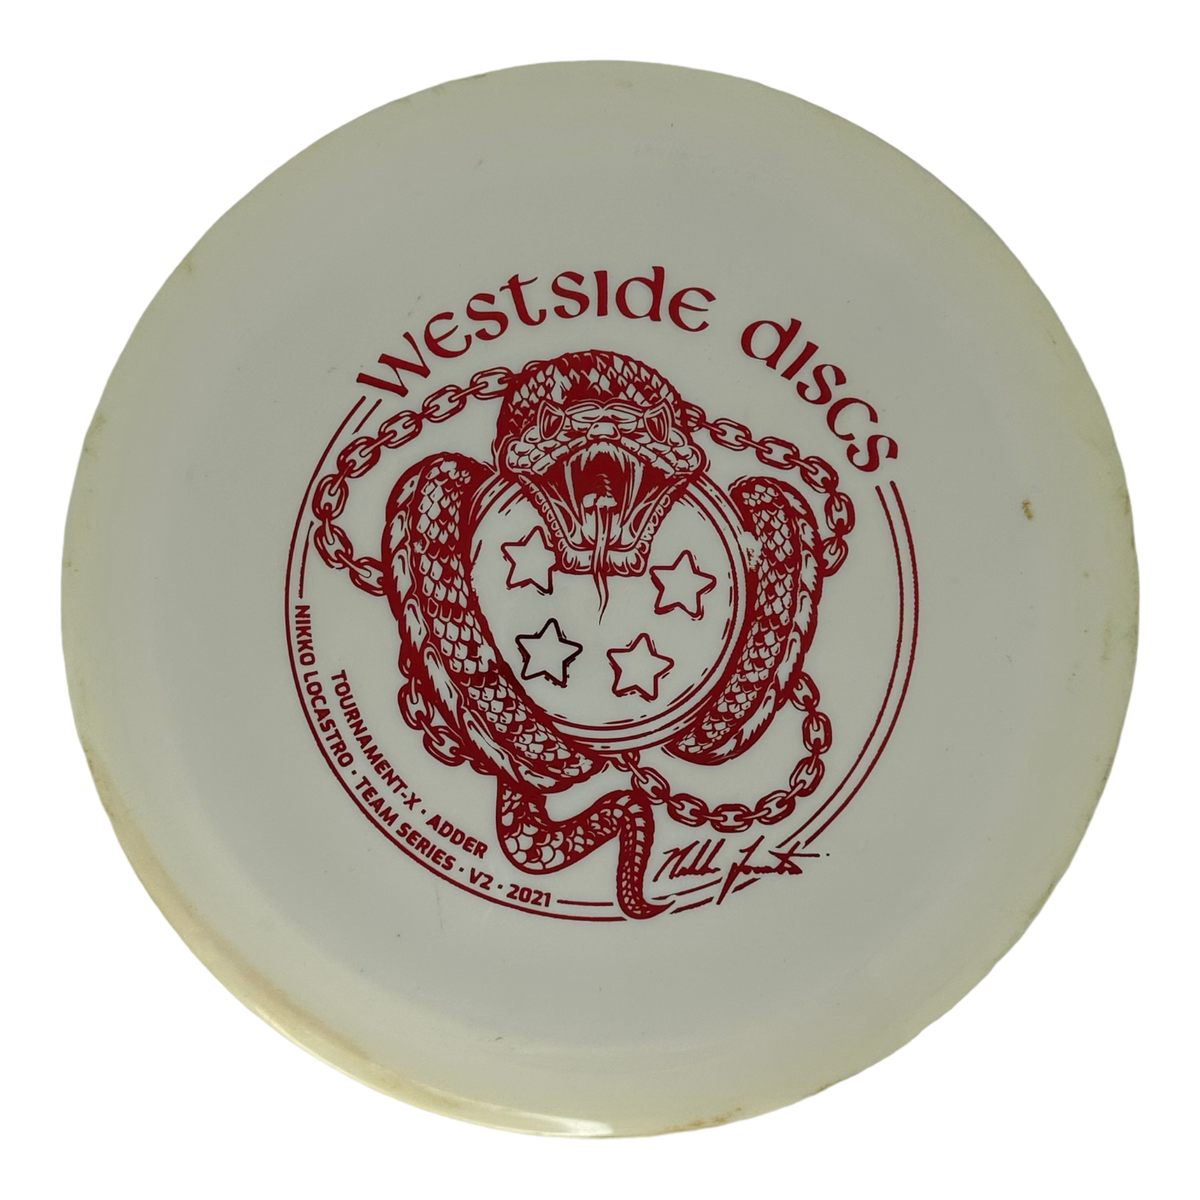 Westside Discs Pre-Owned Distance Drivers